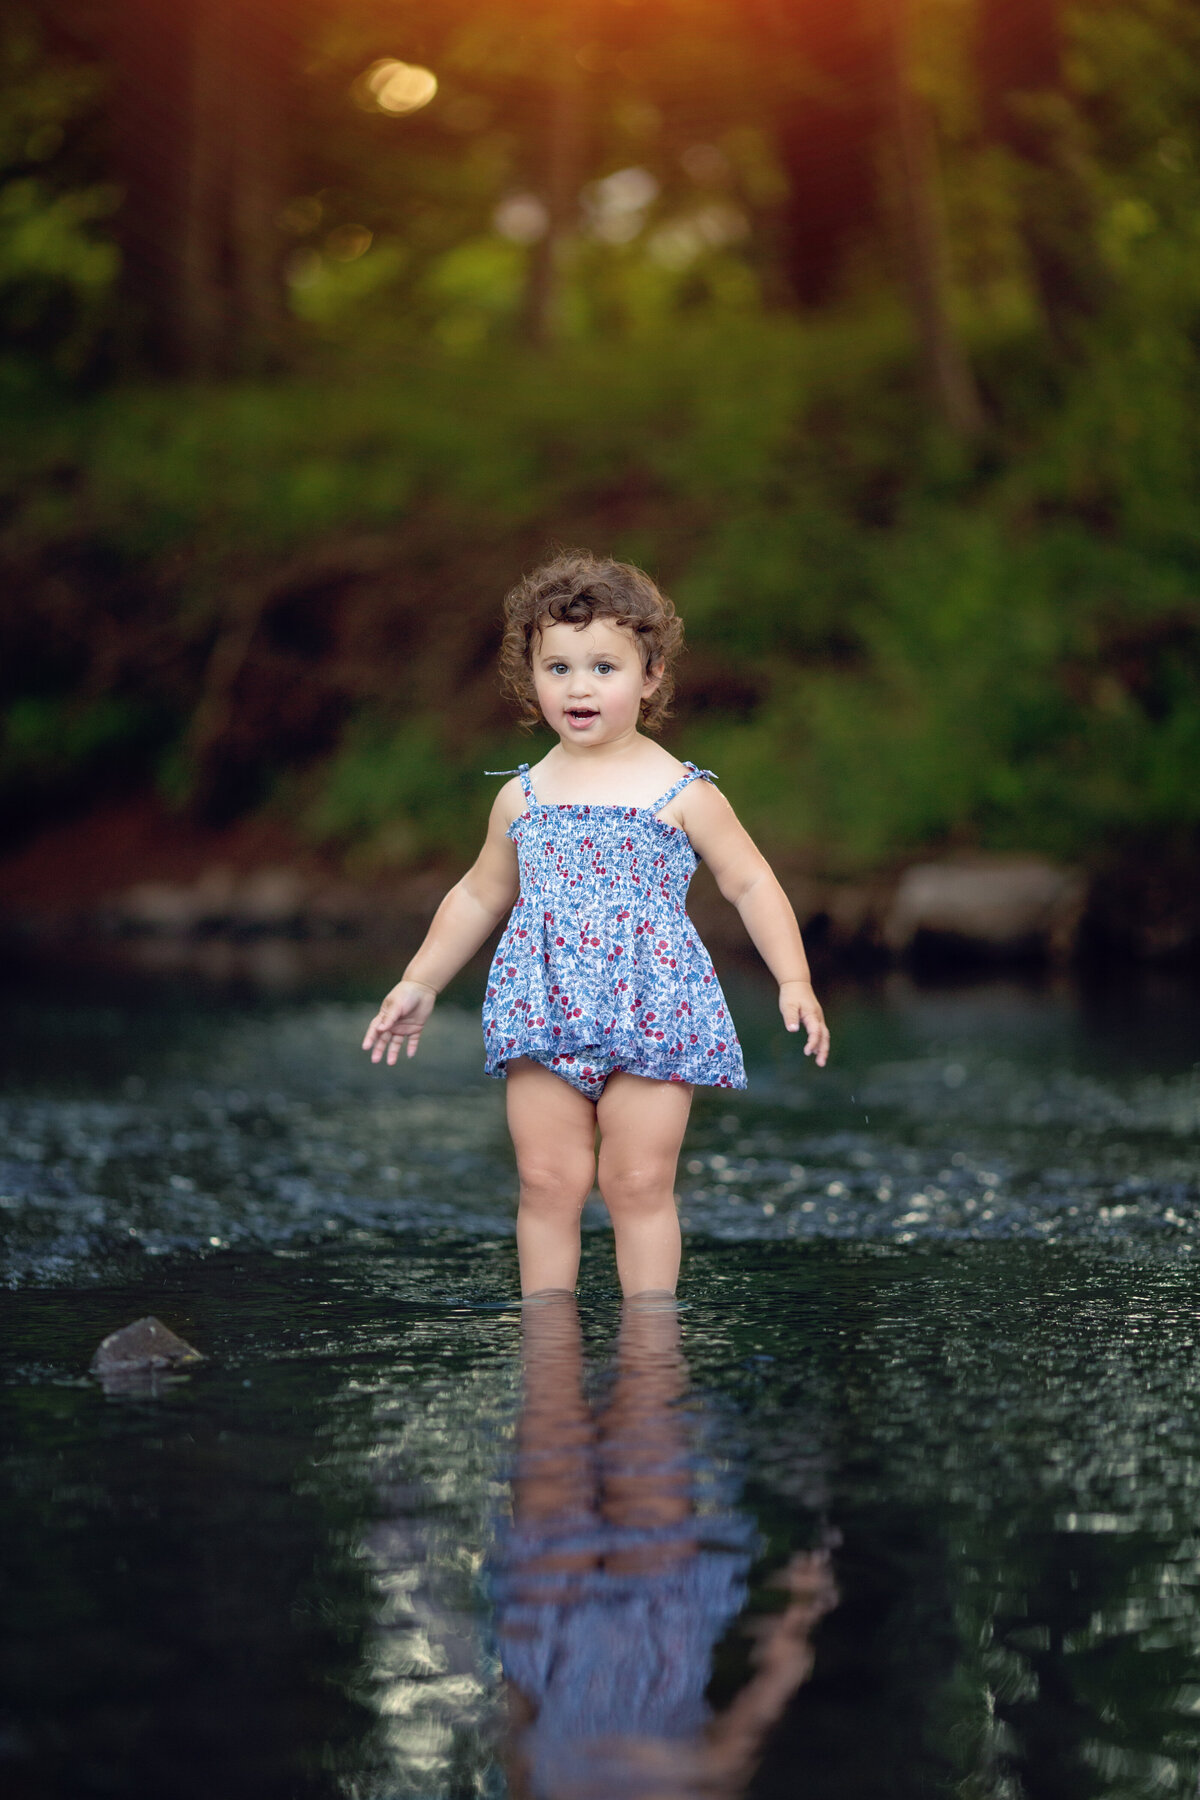 A young girl in a blue floral print bathing suit wades through a shallow river